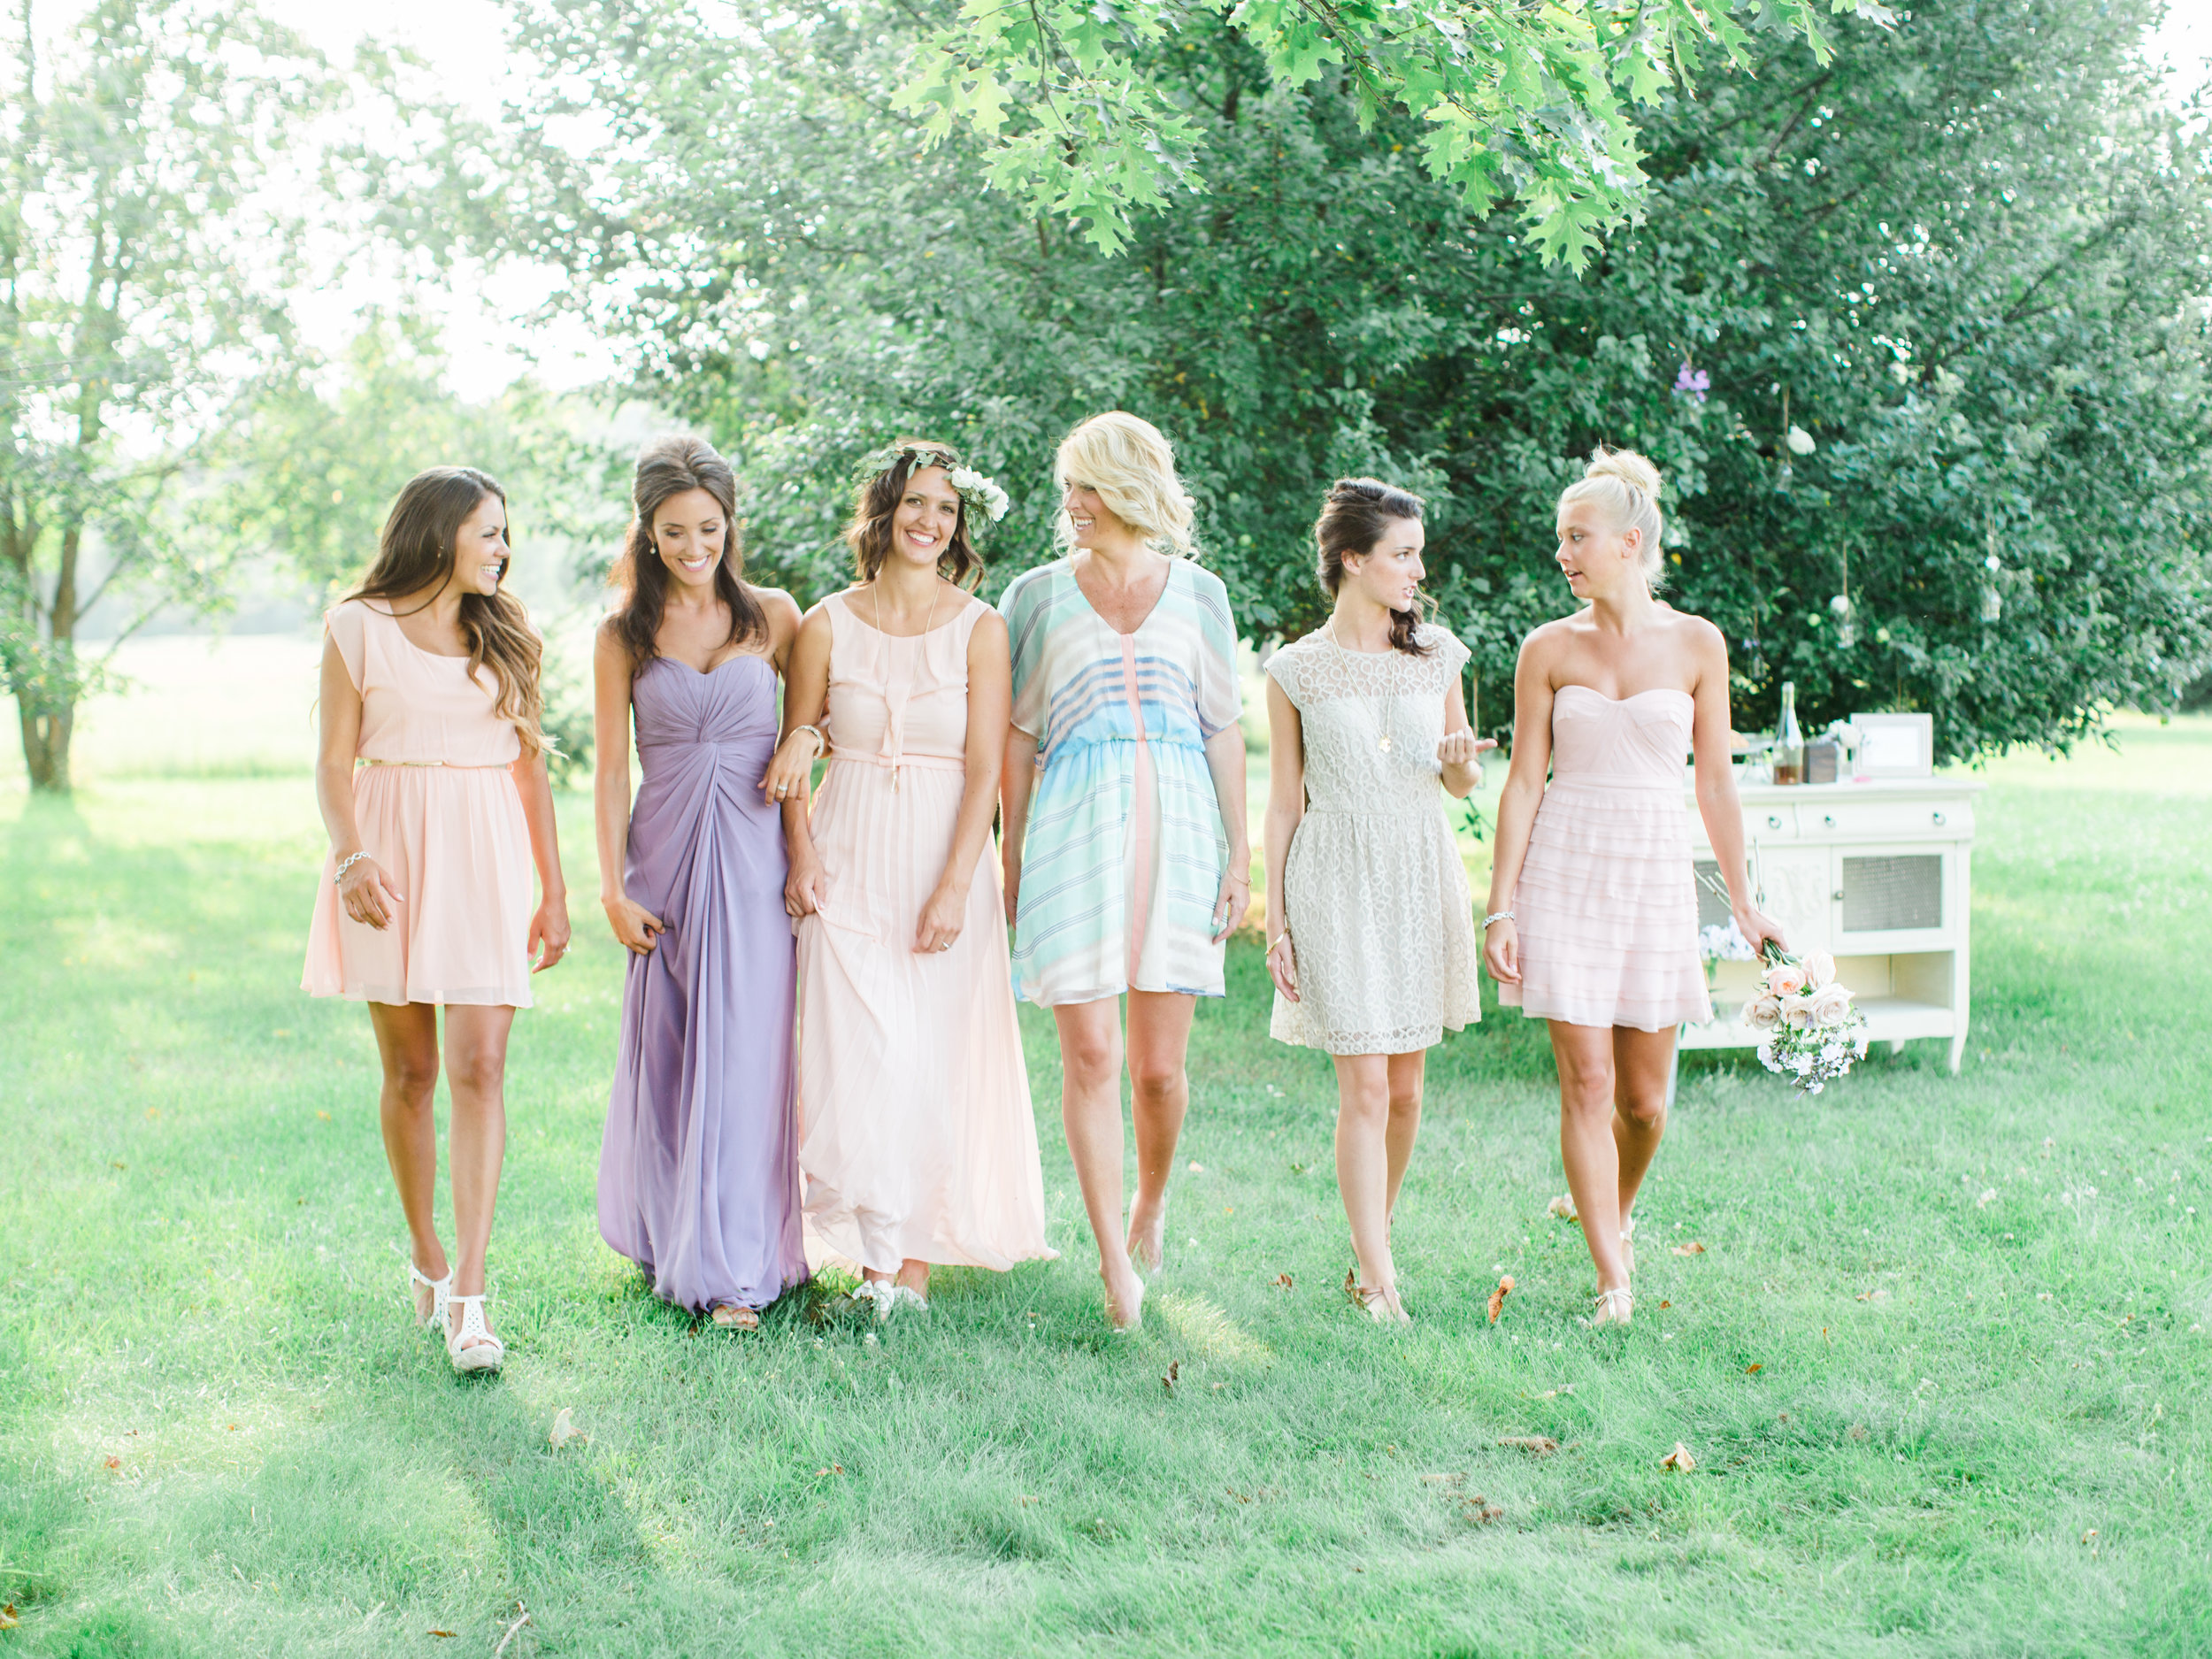 Outfits in pastel colors for tea party